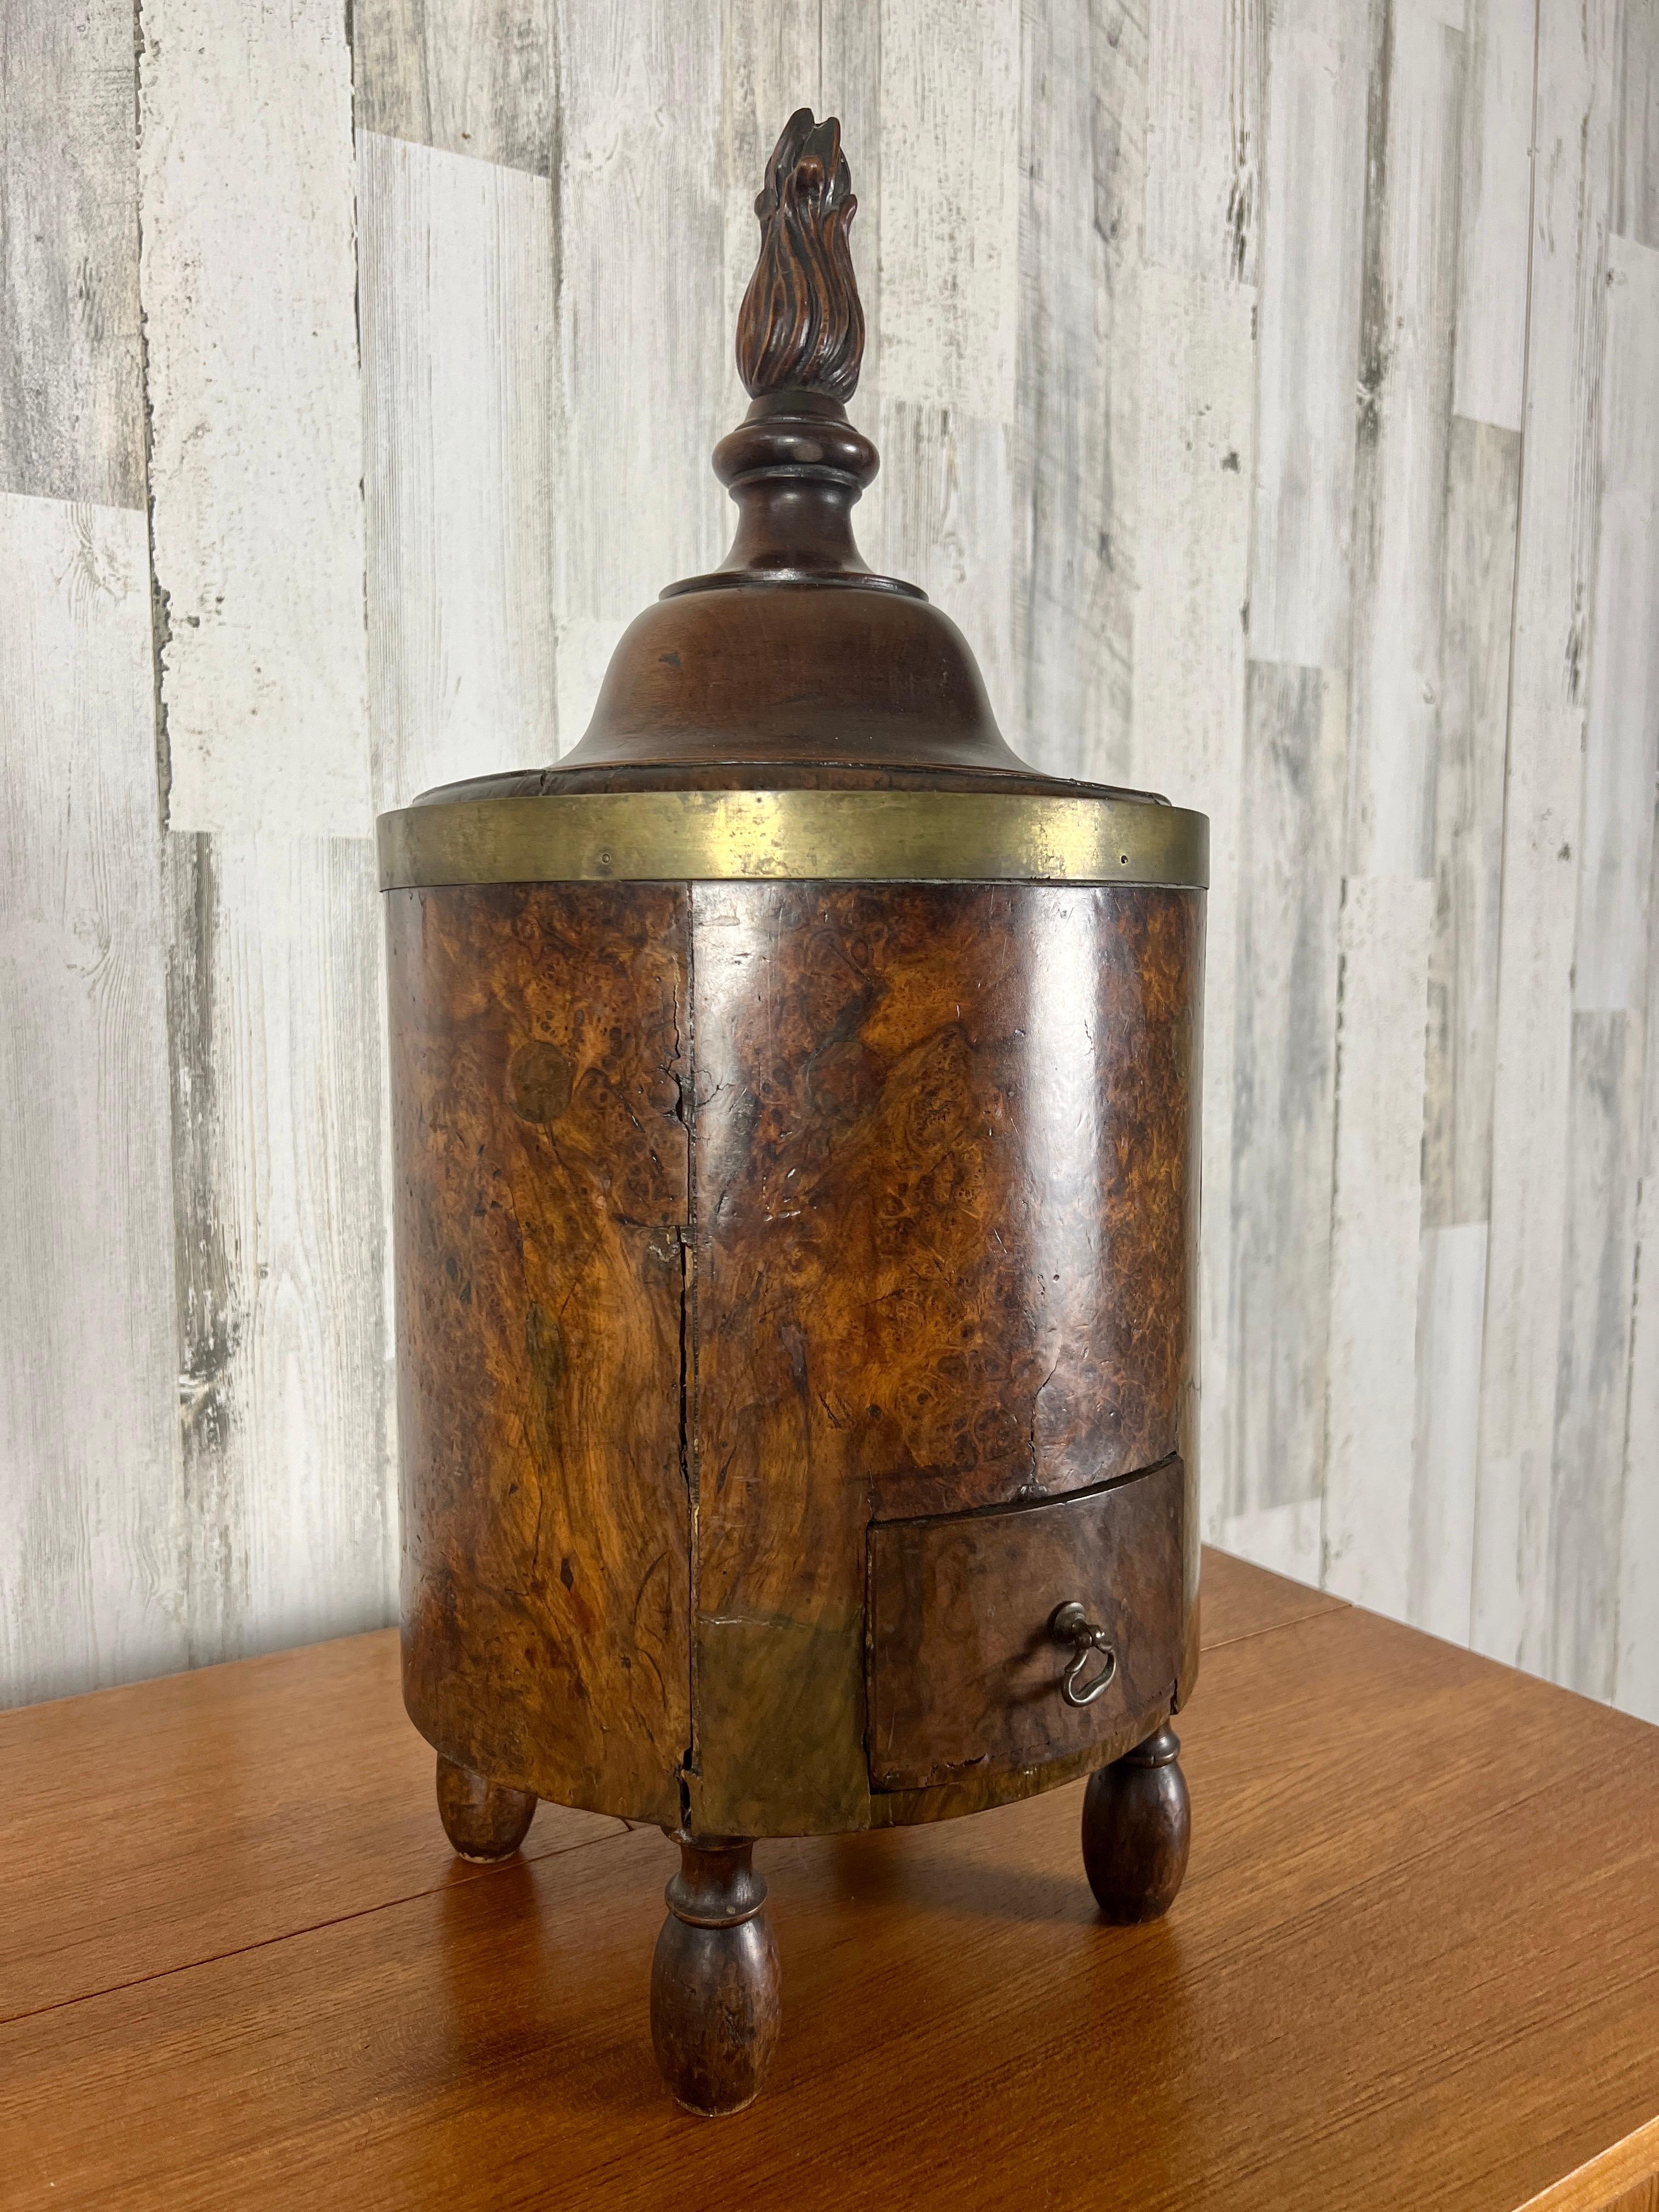 18th century Burlewood coal bucket with flame finial on top and match drawer at the bottom.